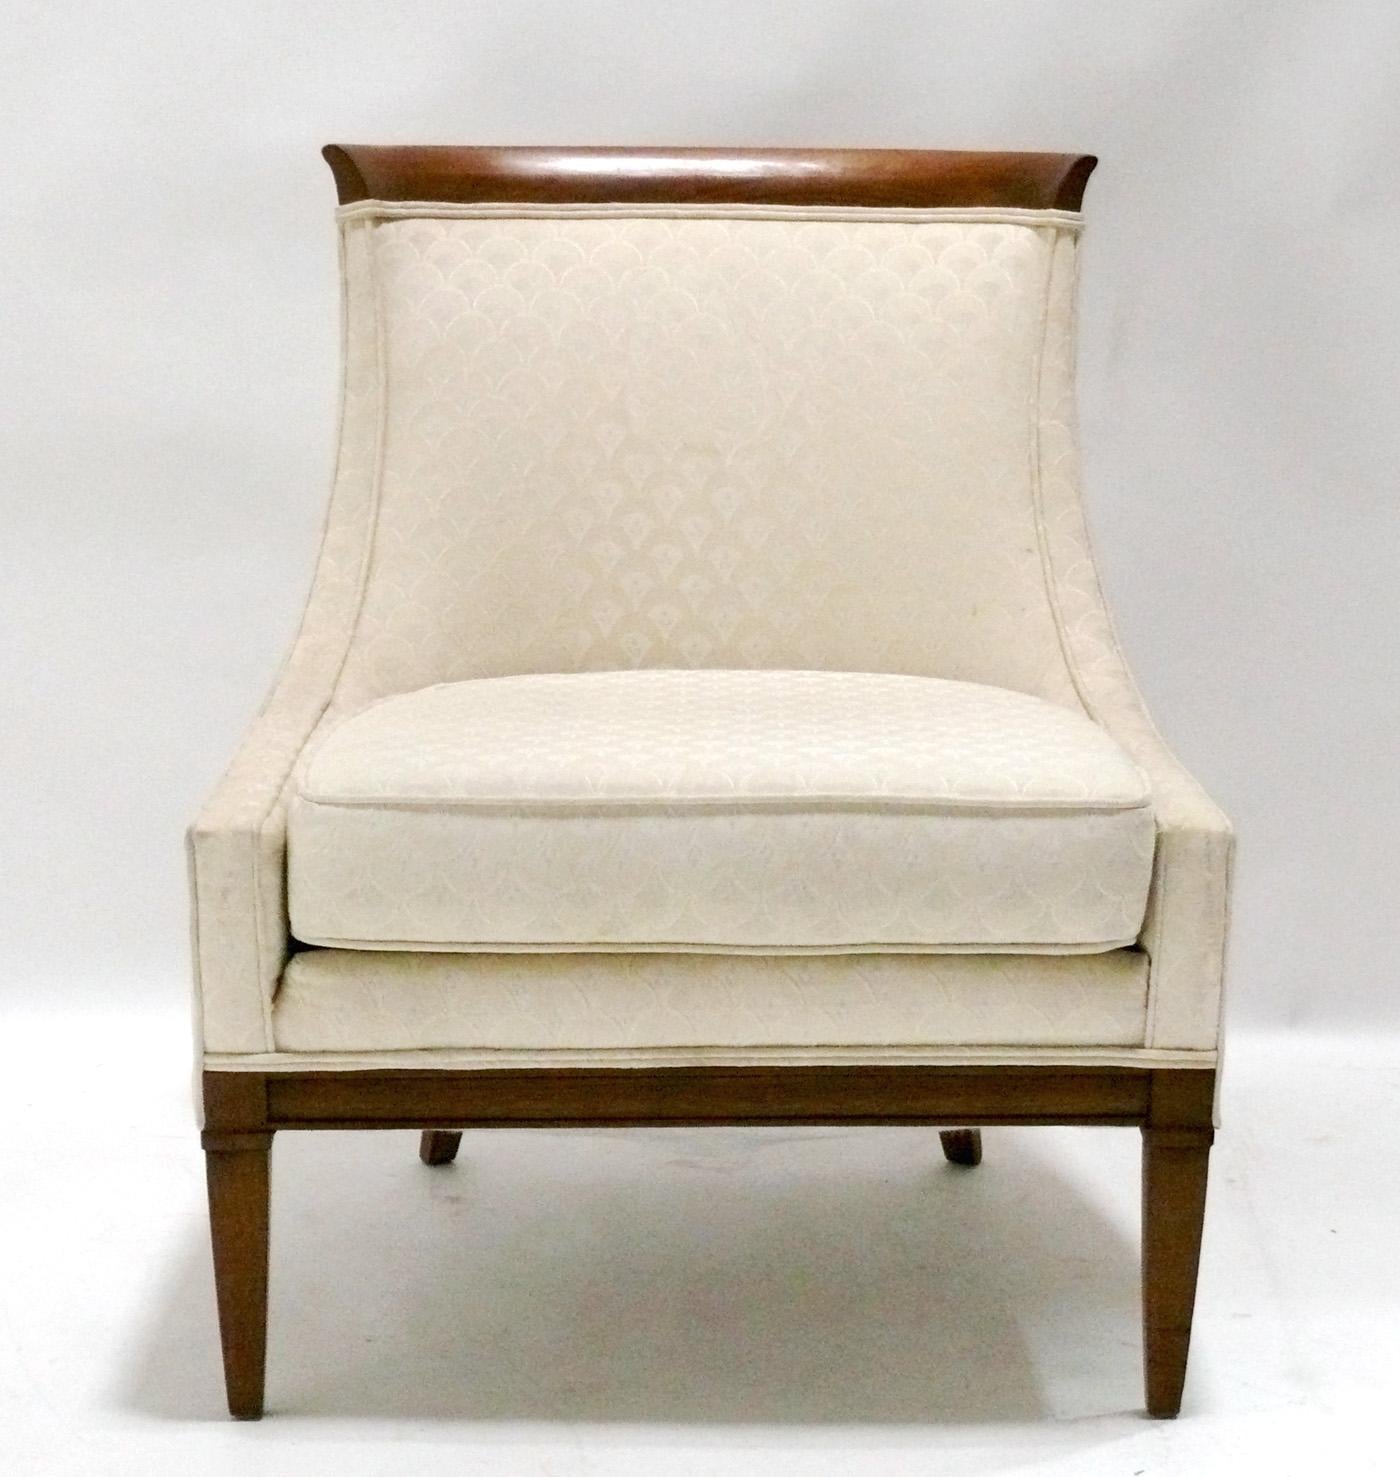 Pair of Elegant Lounge chairs, designed by Erwin Lambeth for Tomlinson, American, circa 1950s. These chairs are currently being refinished and reupholstered and can be completed in your choice of wood finish color and reupholstered in your fabric.